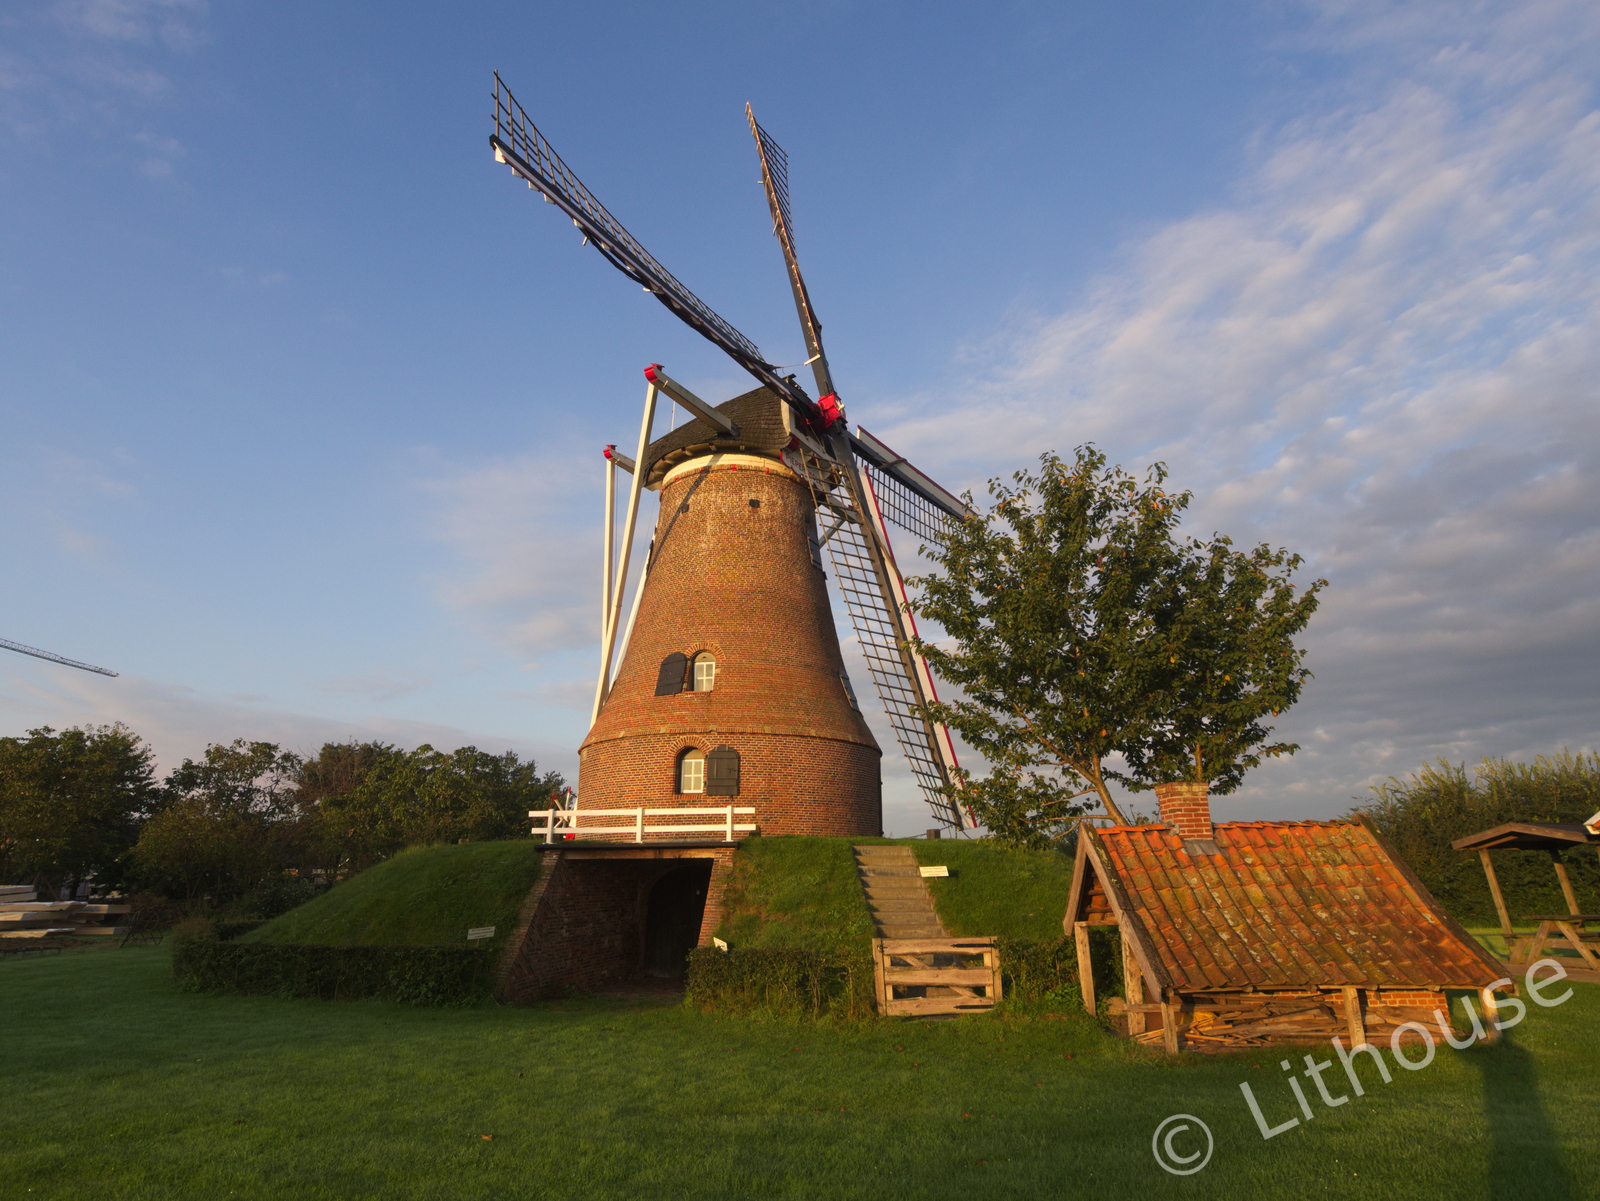 Wooden windmills and prime numbers